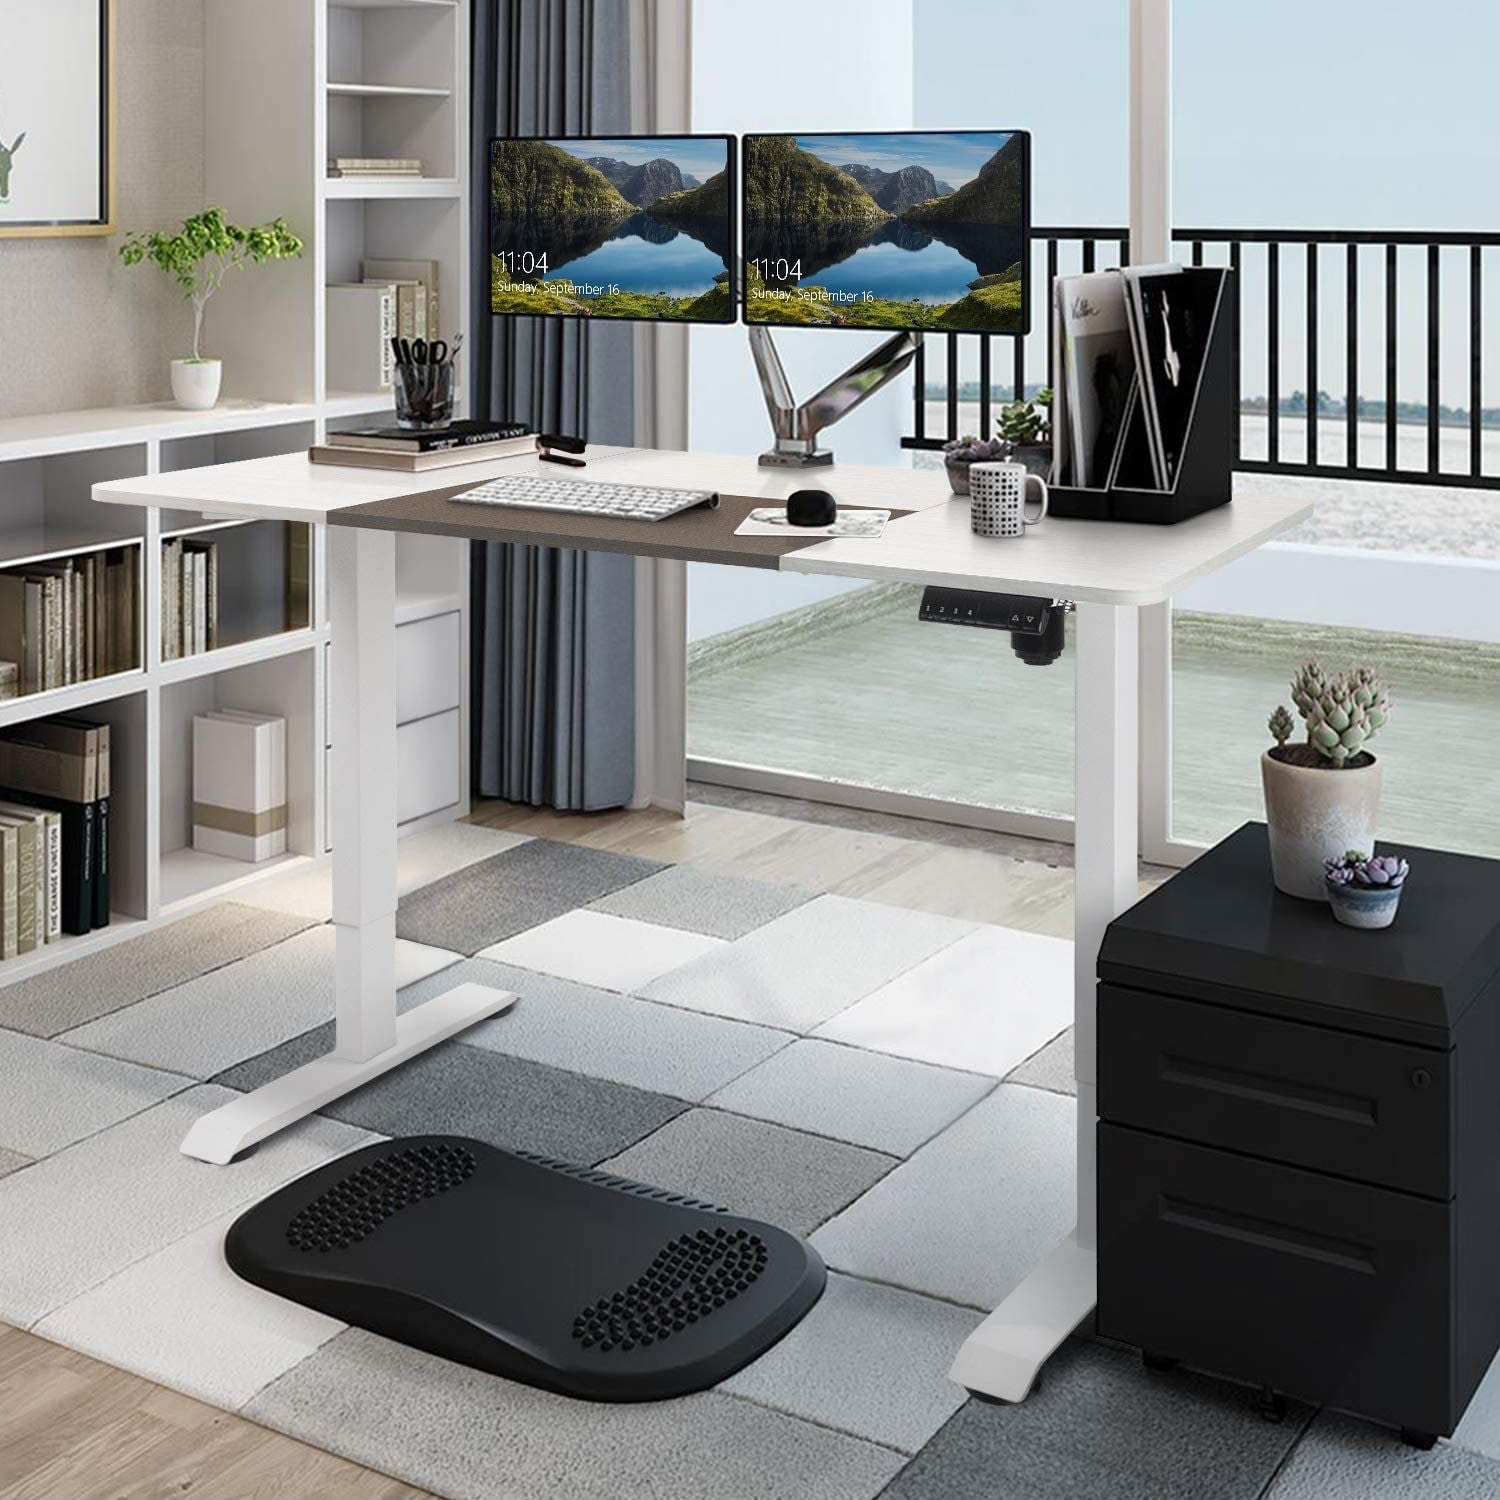 https://ak1.ostkcdn.com/images/products/is/images/direct/4f1dfe2fc8955da5e5bca6a098dad77523ac58ad/Homall-Electric-Height-Adjustable-Standing-Desk-55inch-Office-Desk.jpg